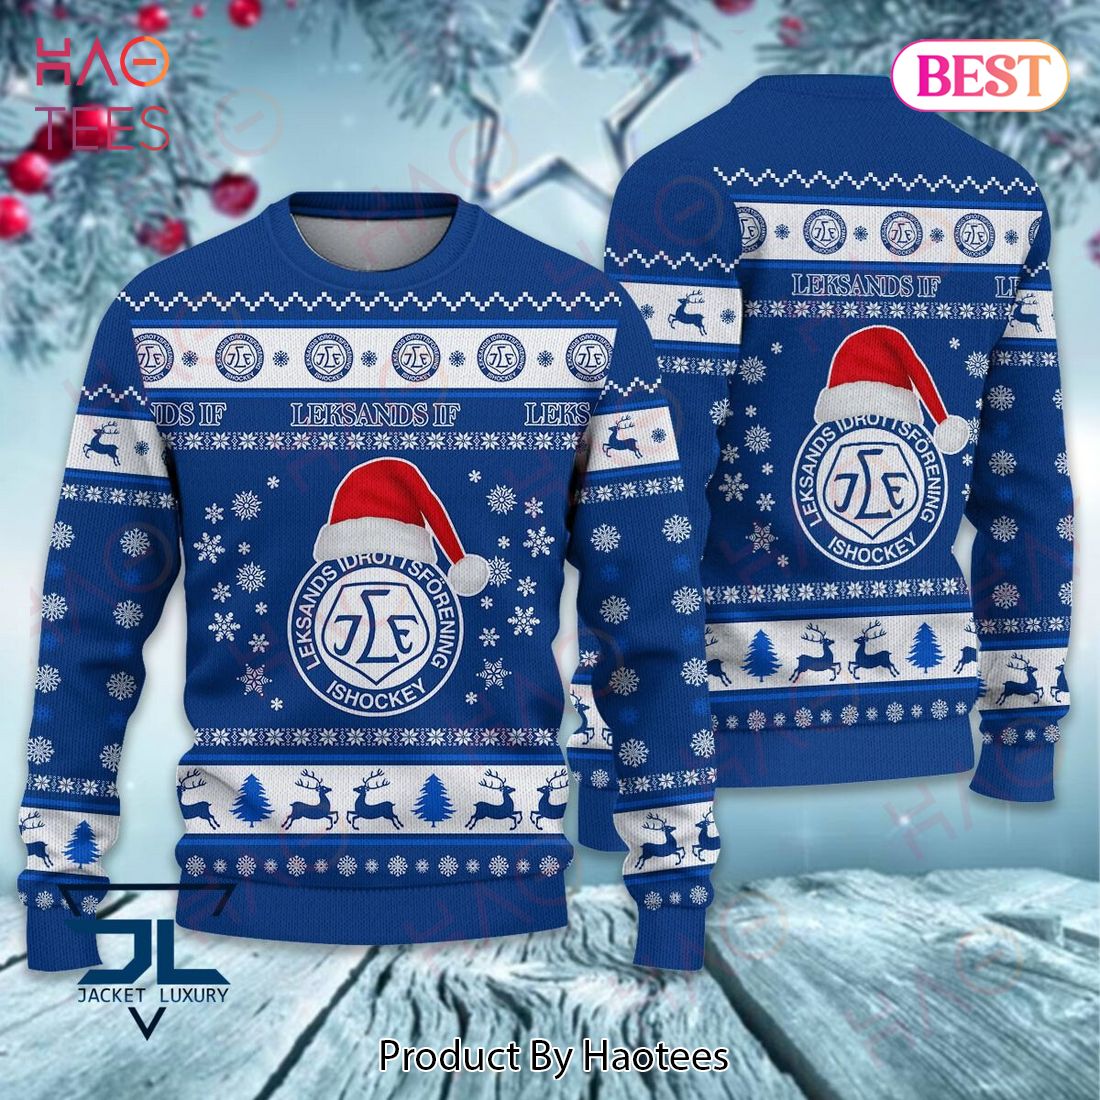 NEW Leksands IF Luxury Brand Sweater Limited Edition